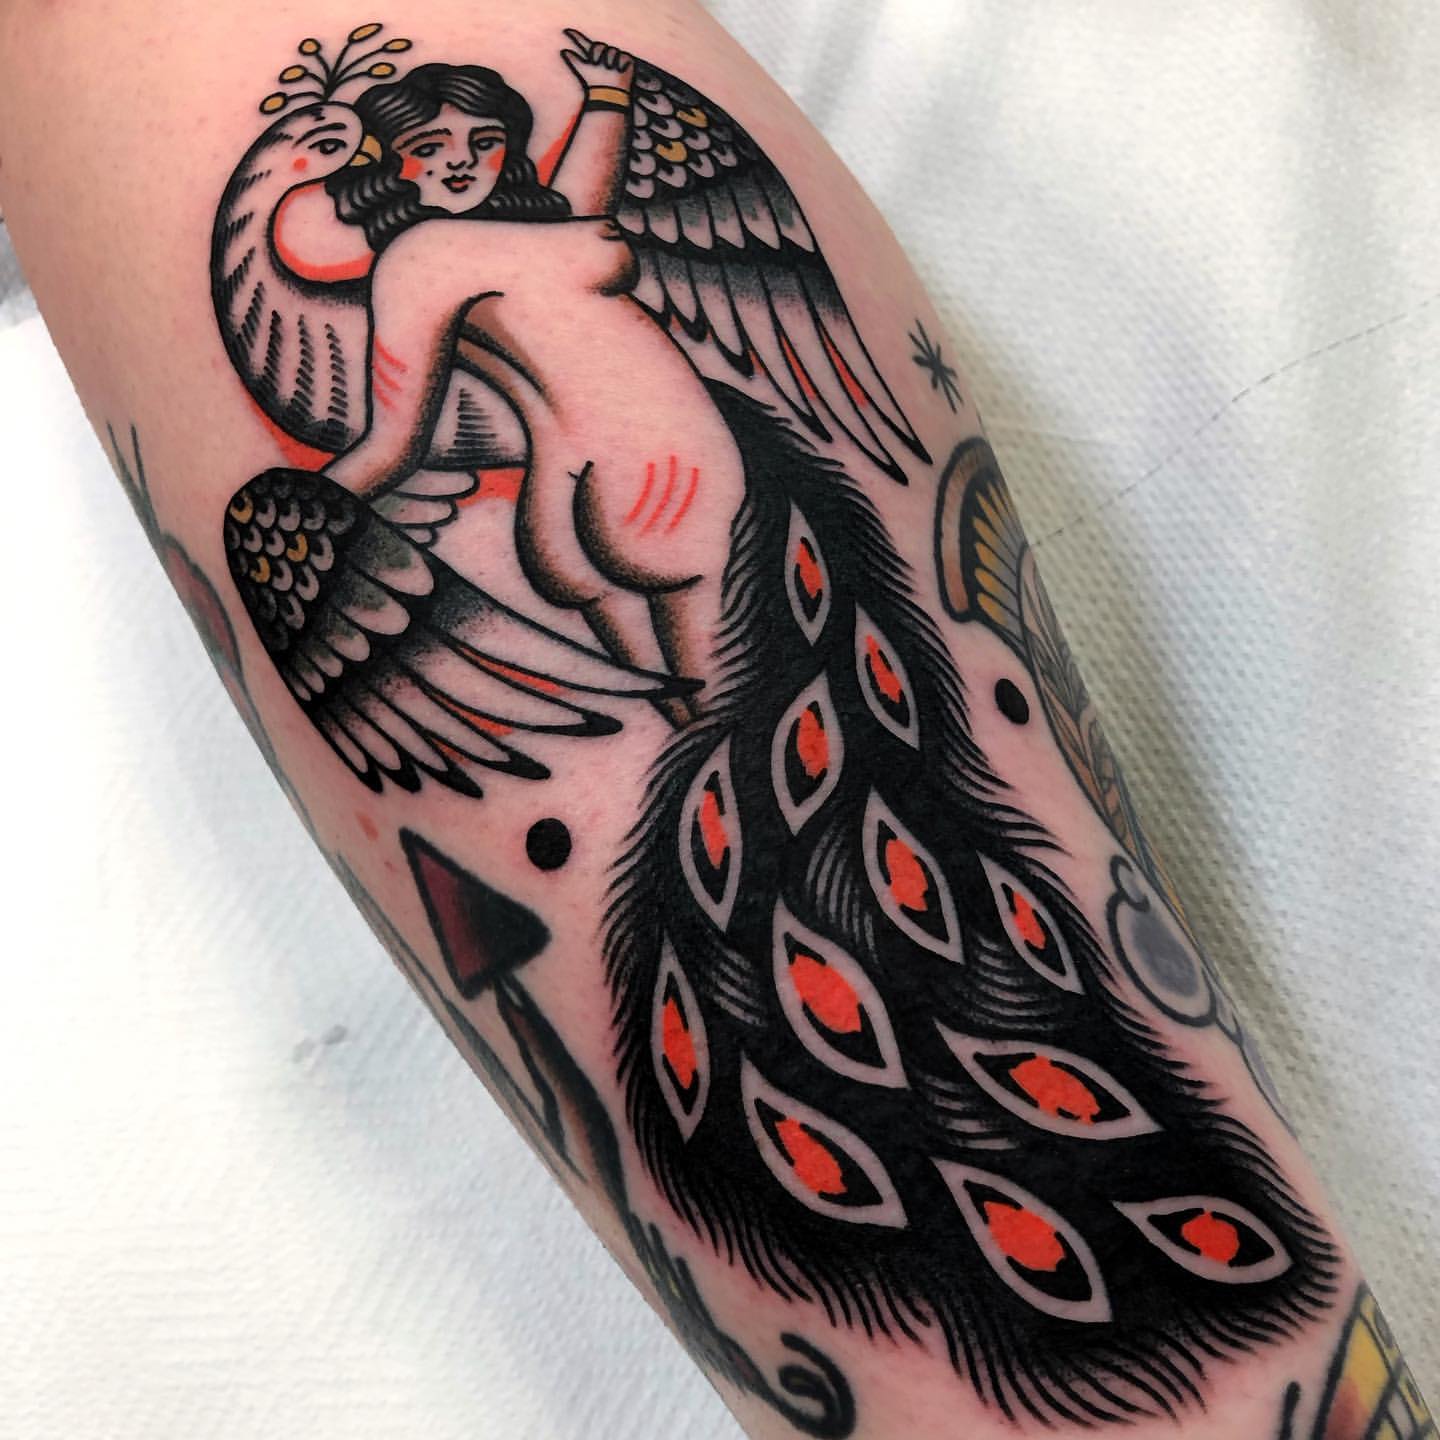 Super fun black and grey peacock by Rebecca Loveless | By Tradition Tattoo  | Facebook